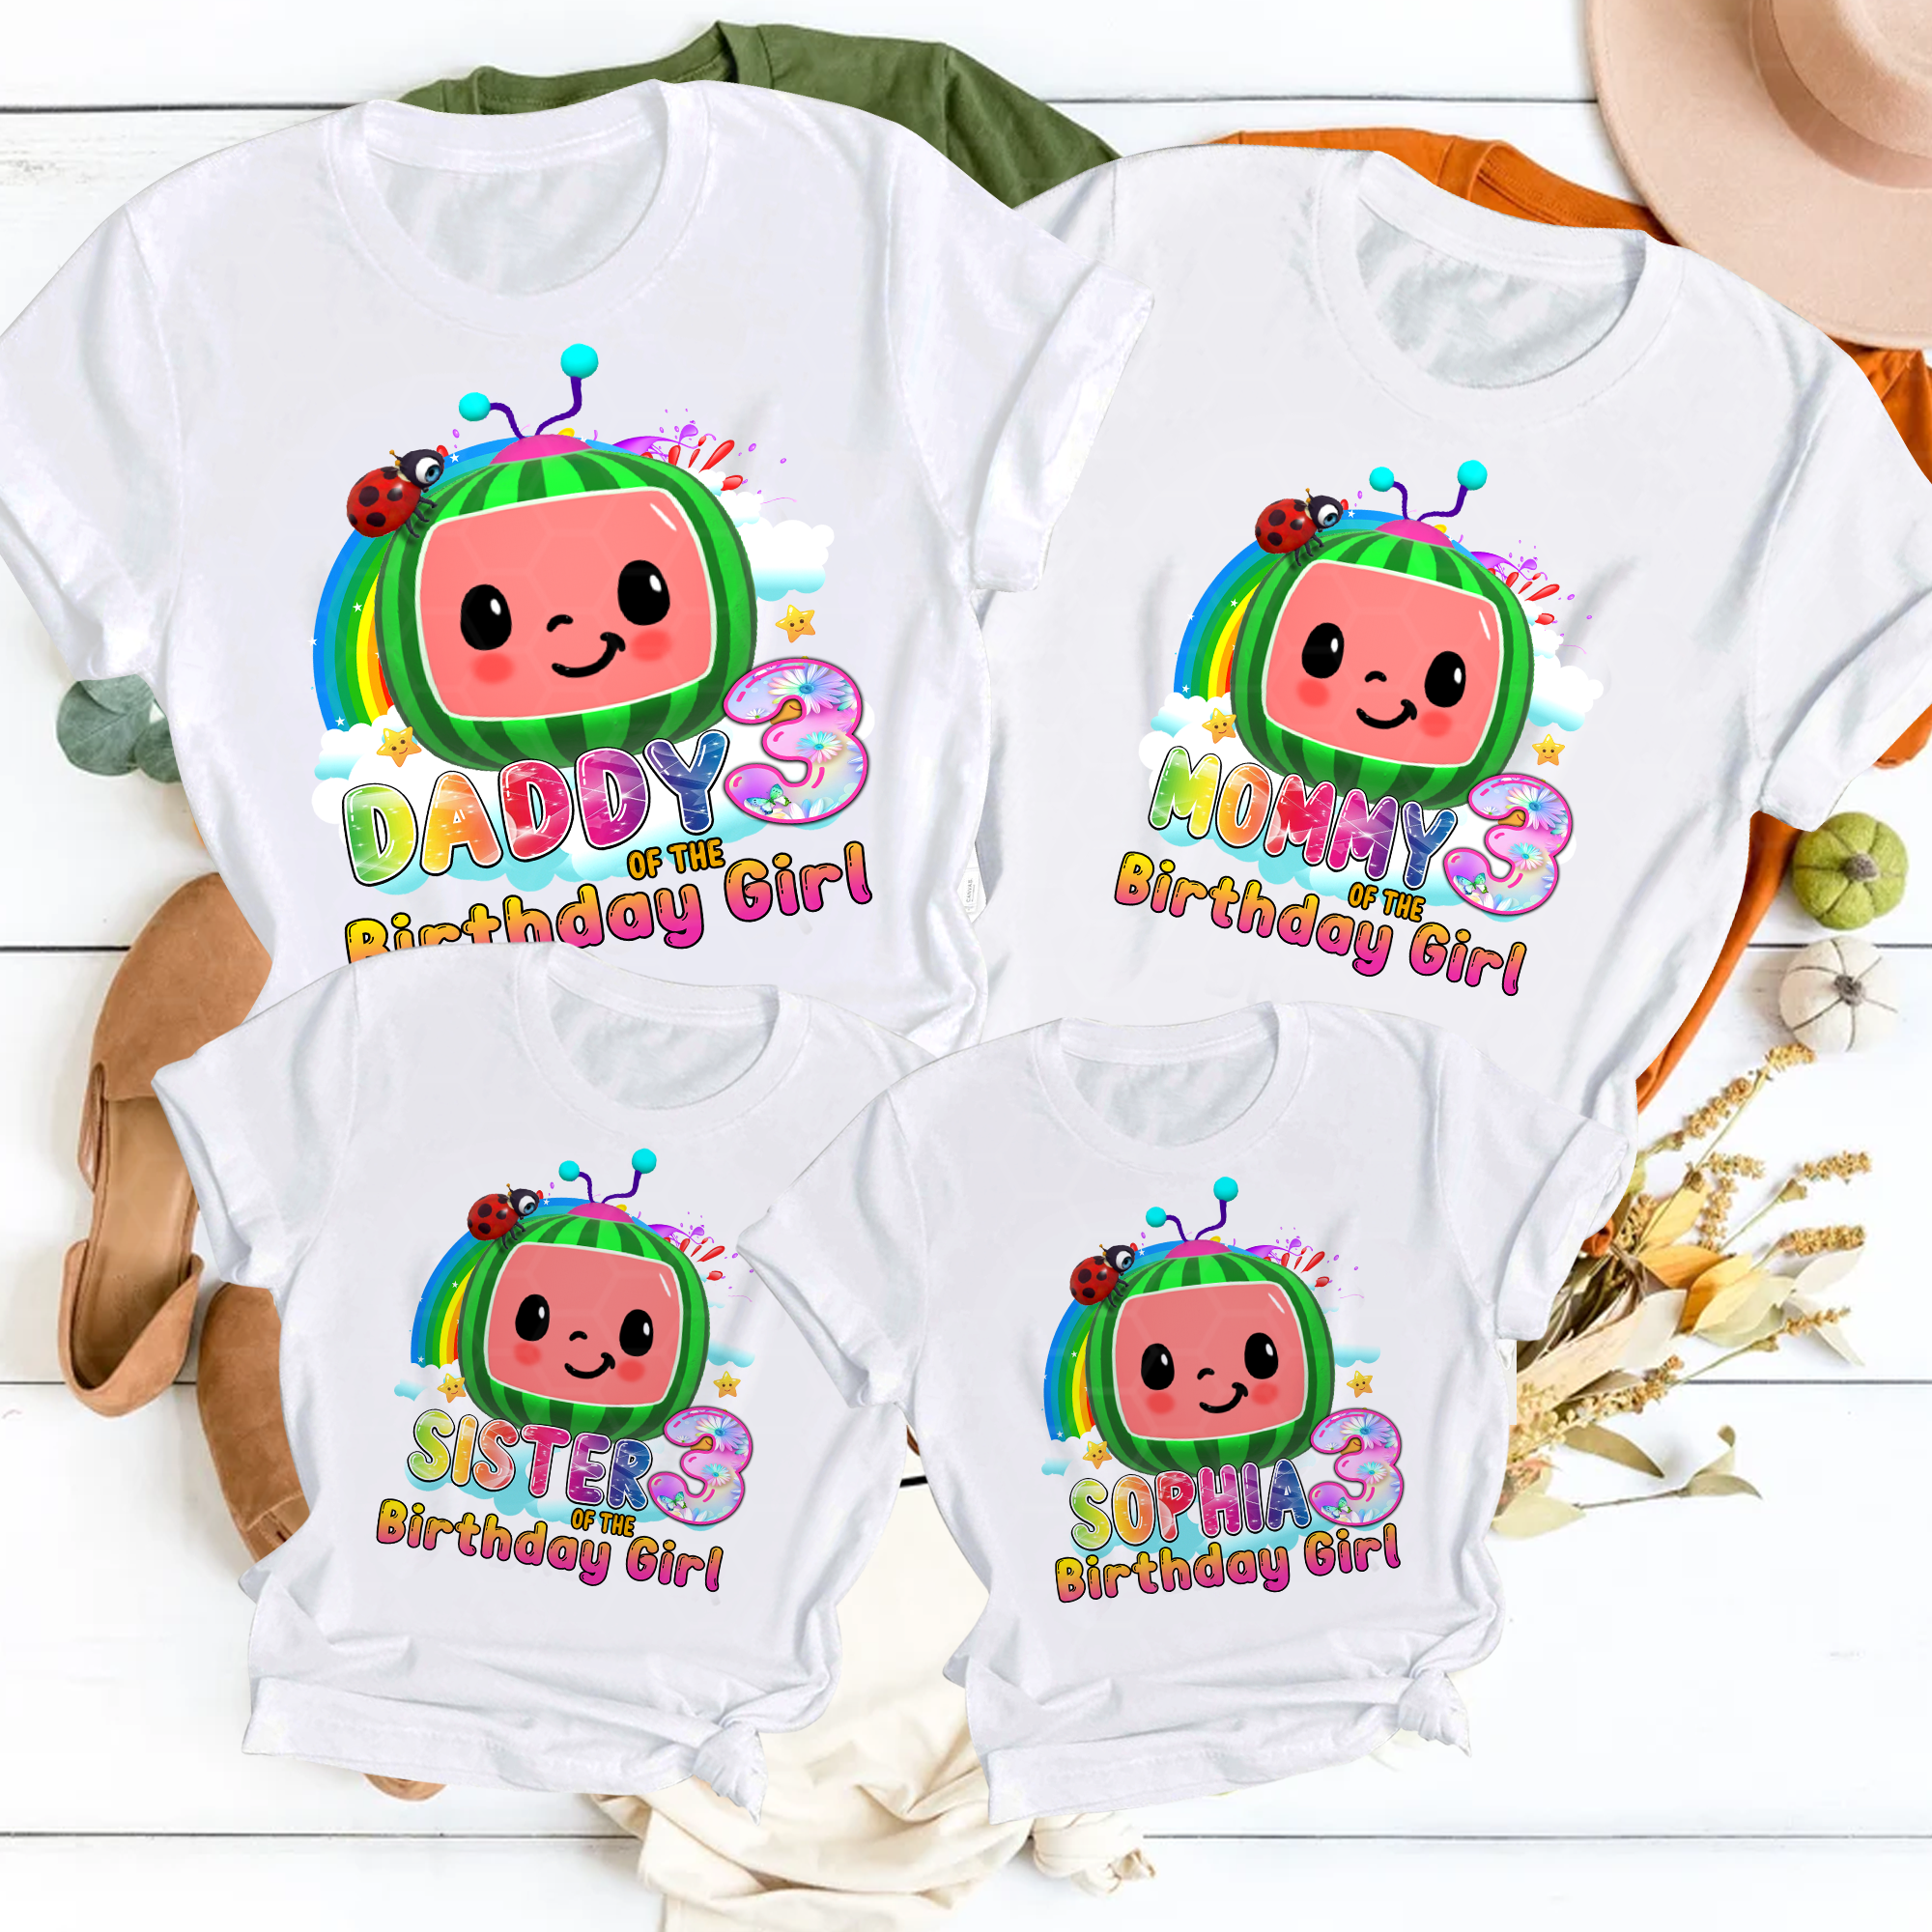 Personalized Coco-melon Birthday Shirts, cocomelon family shirts, Cocomelon Party Family matching shirt,Custom Name And Ages